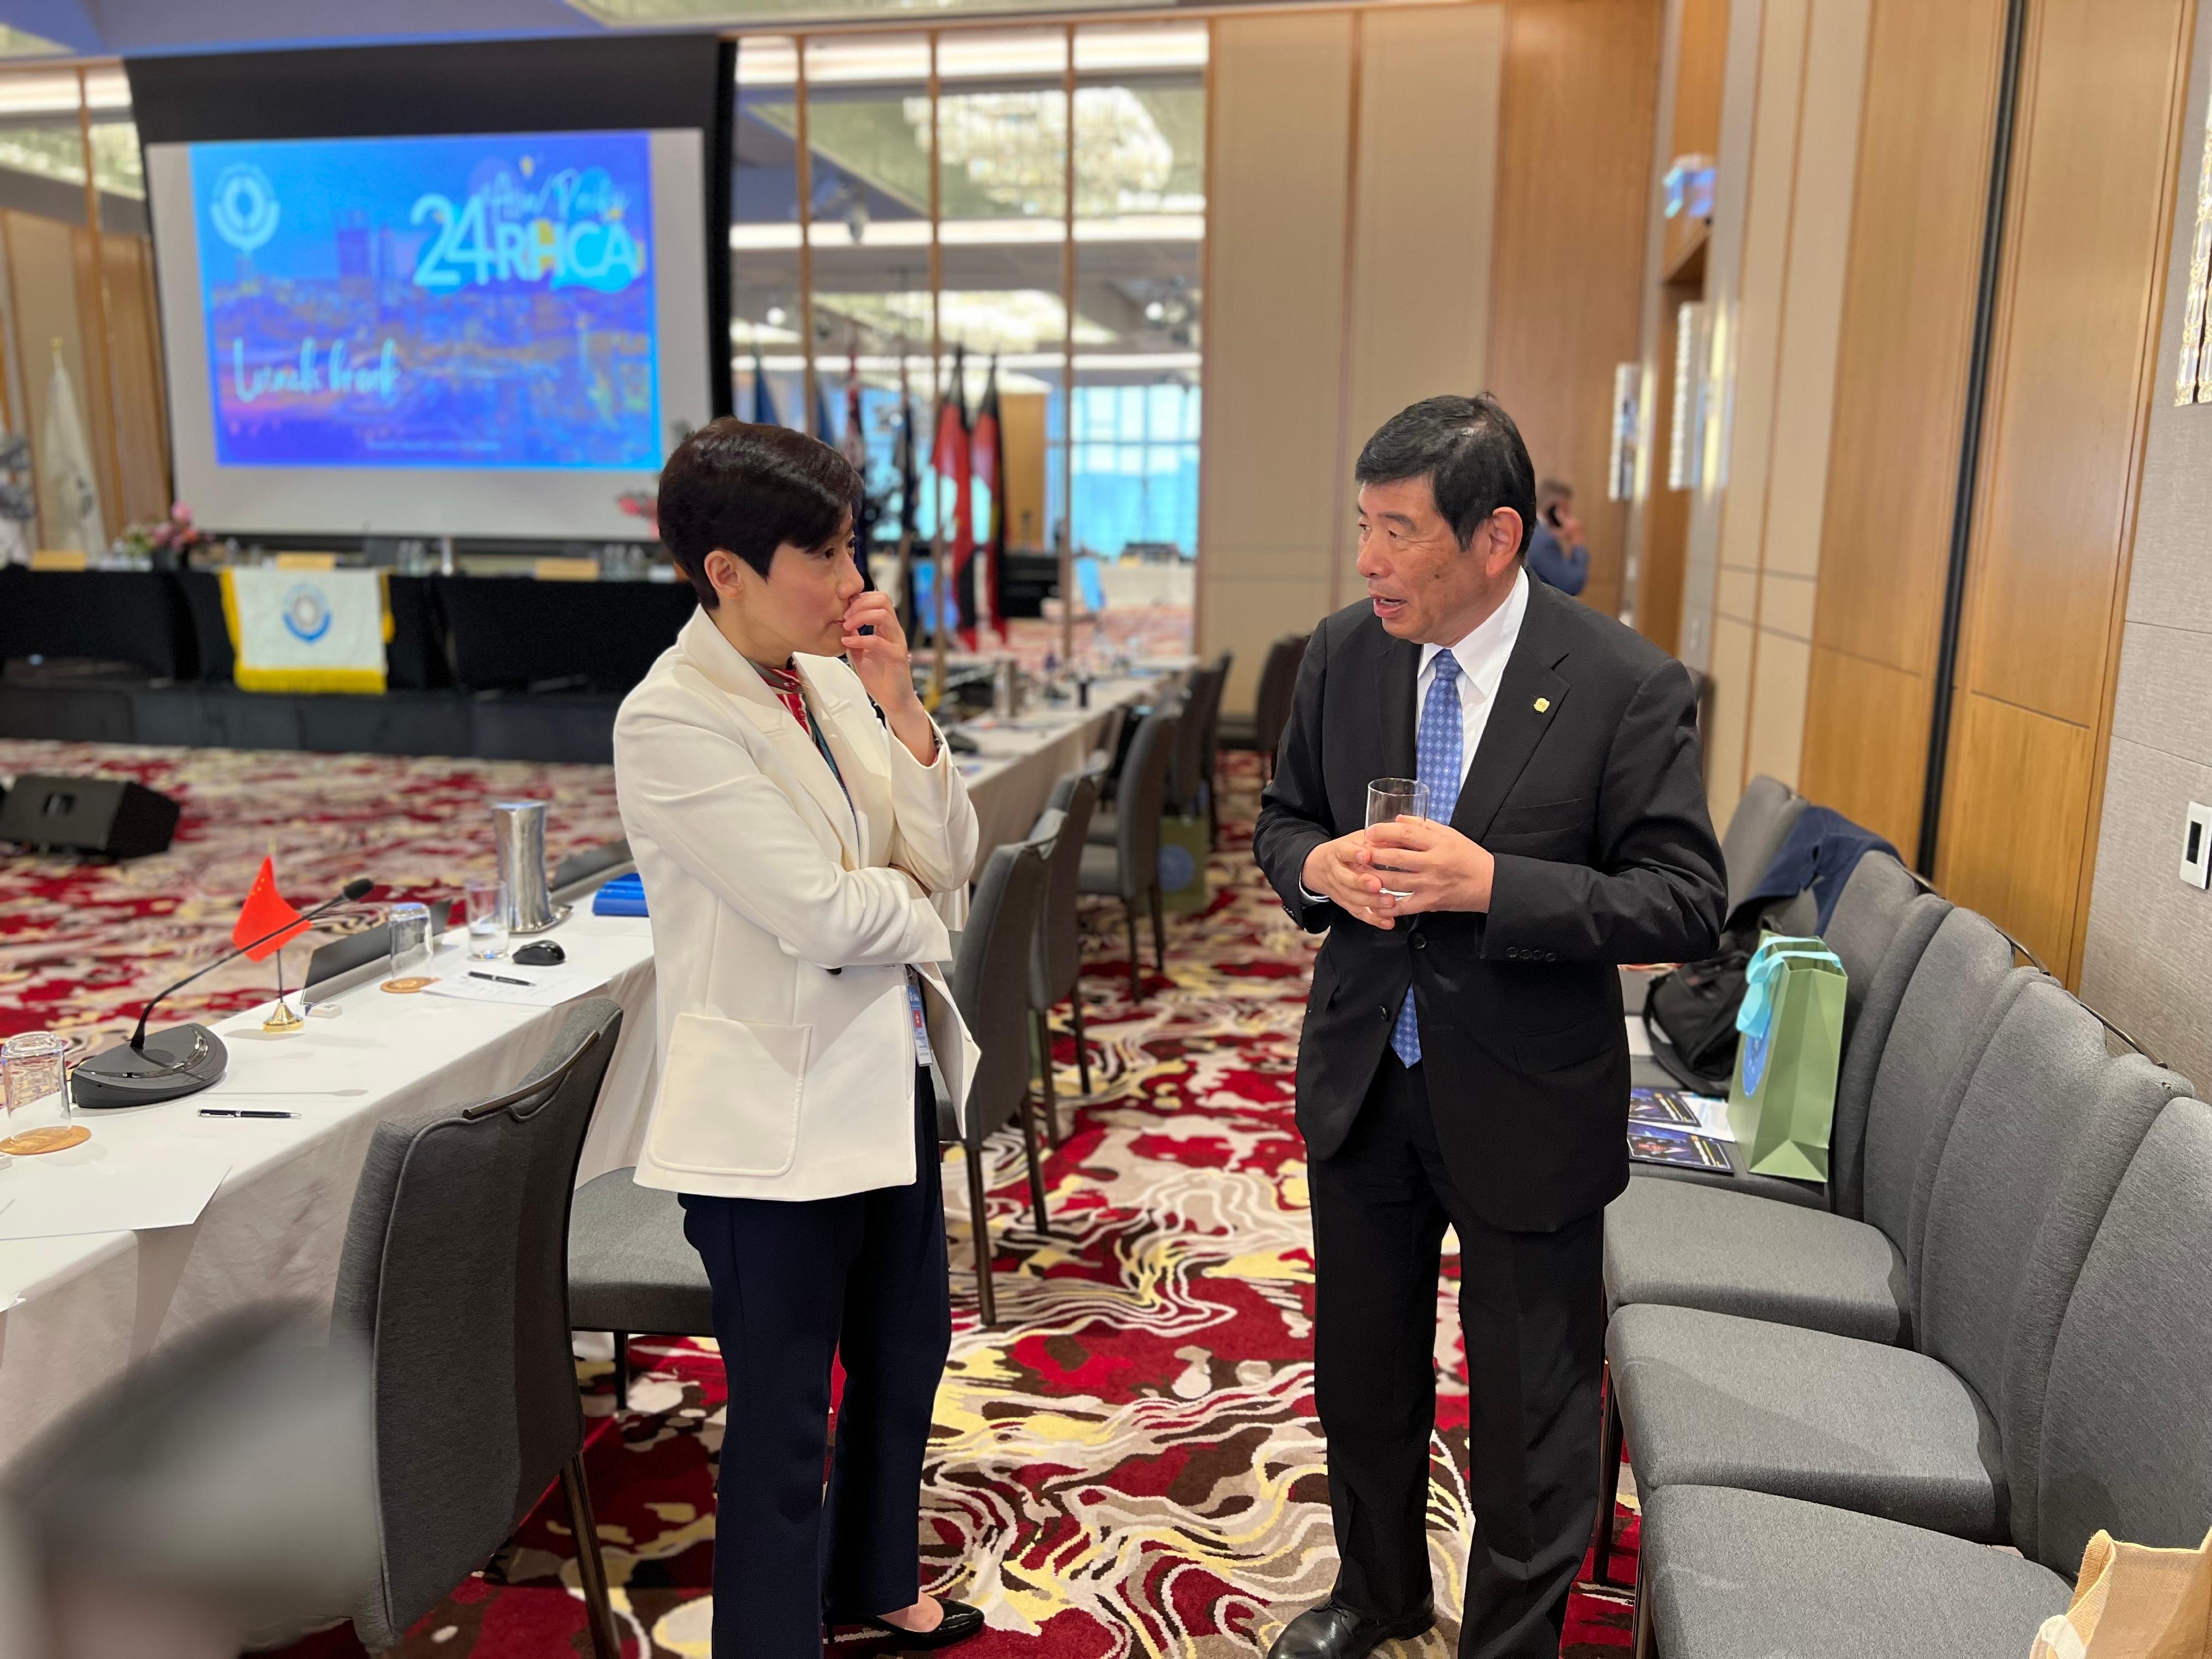 The Commissioner of Customs and Excise, Ms Louise Ho (left), from May 28 to 31, led a delegation to attend the 24th World Customs Organization (WCO) Asia/Pacific Regional Heads of Customs Administrations Conference in Perth, Australia. Photo shows Ms Ho exchanging views with the WCO Secretary-General, Dr Kunio Mikuriya (right).